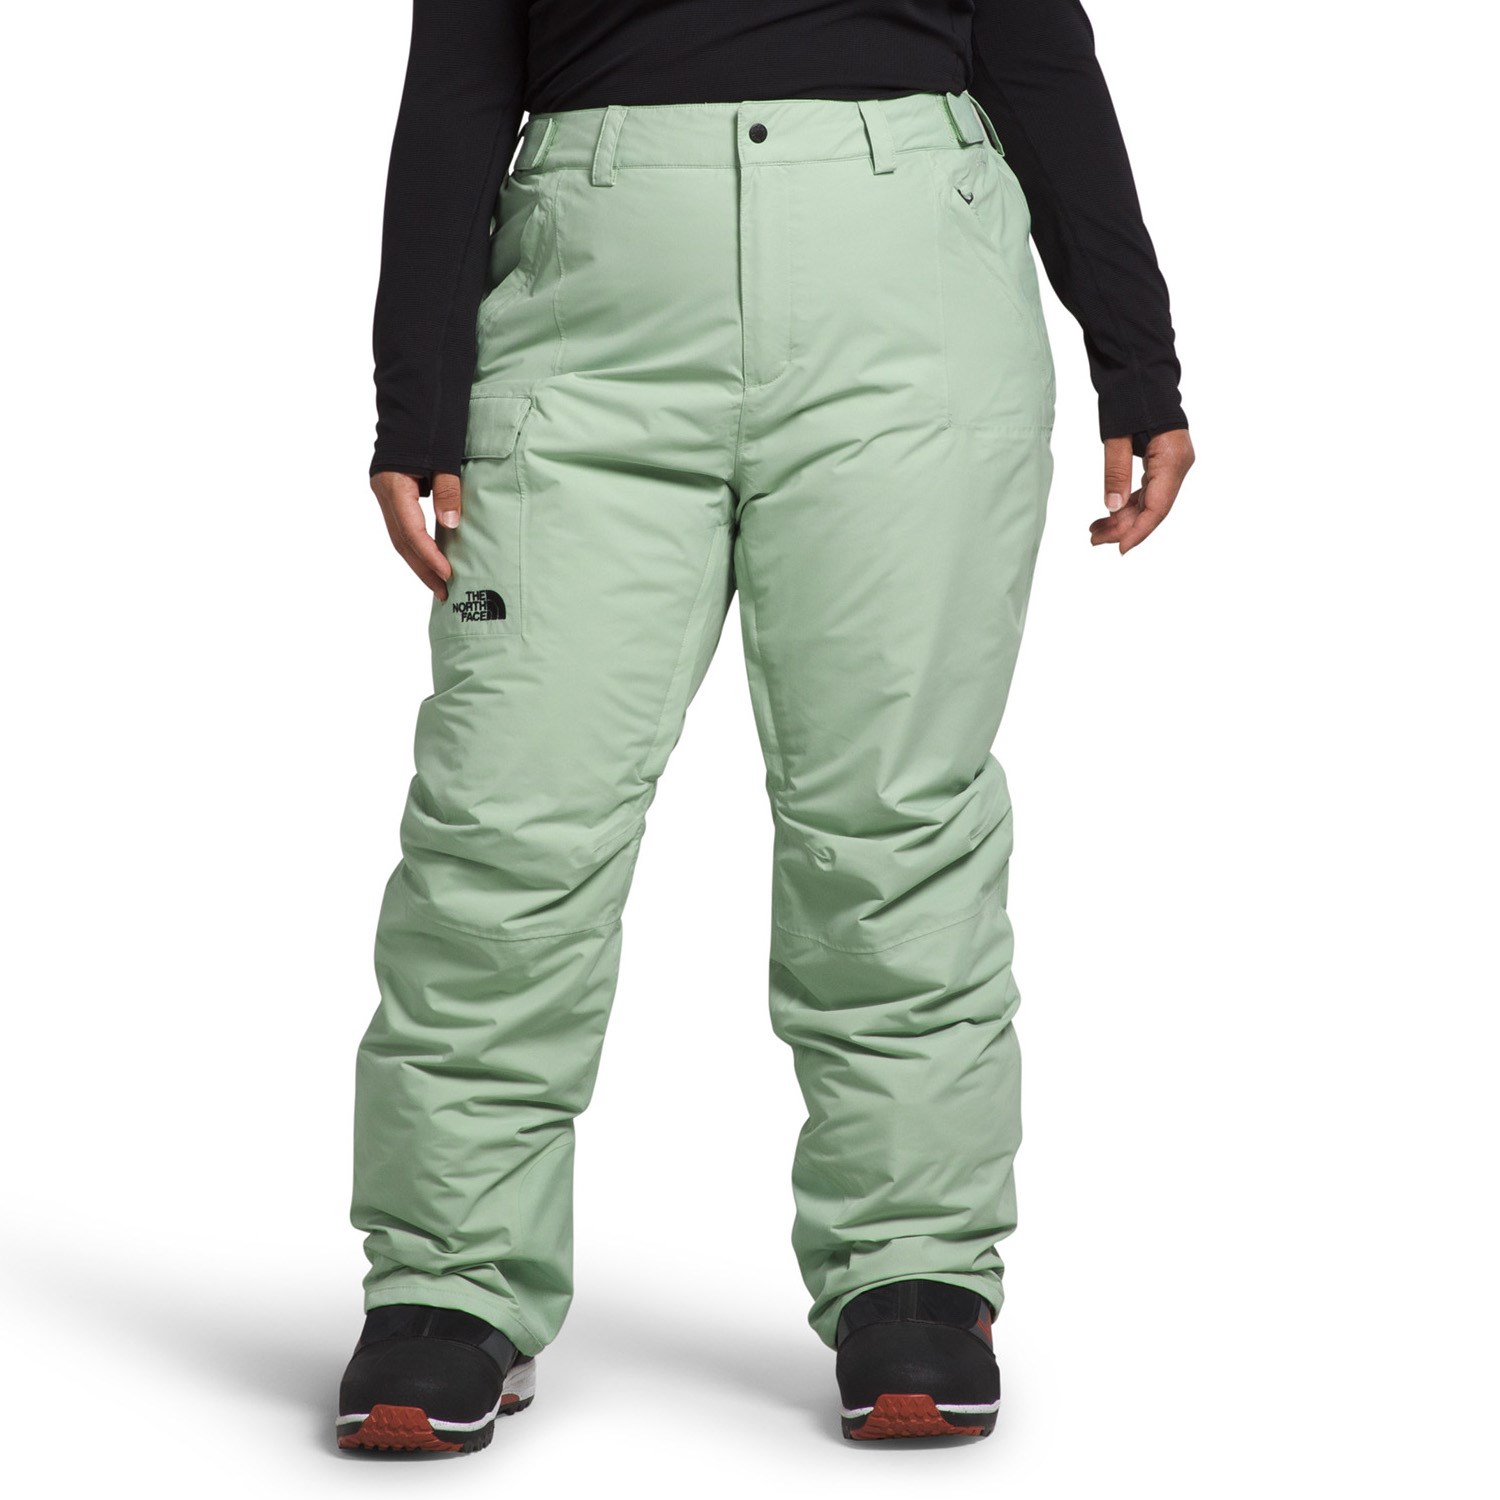 Брюки The North Face Freedom Insulated Plus, цвет Misty Sage брюки the north face freedom insulated plus цвет boysenberry